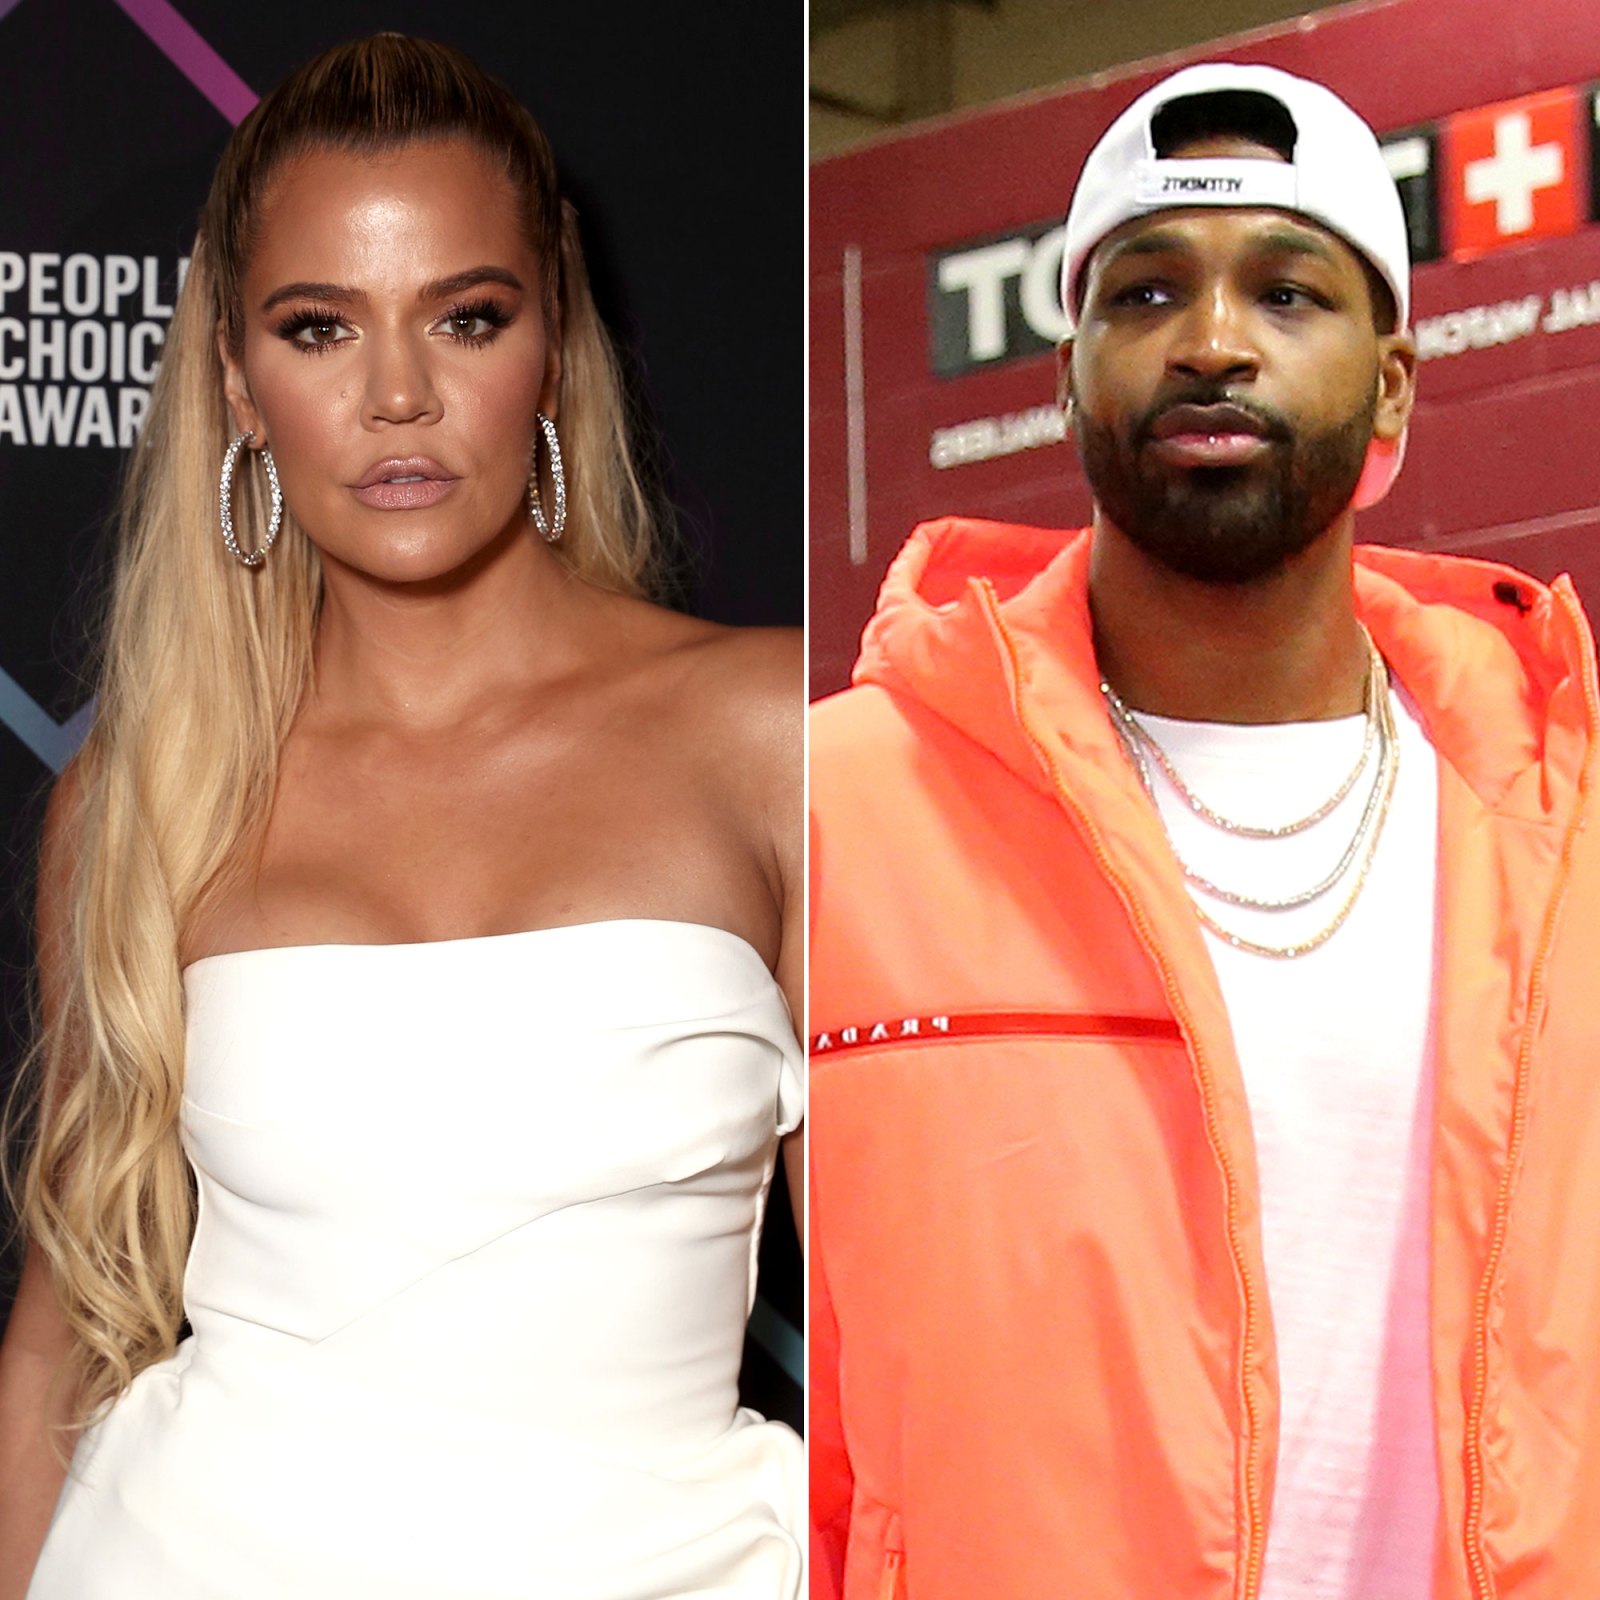 Tristan and Jordyn's Cheating Scandal Behind Khloe's Back: Everything We Know